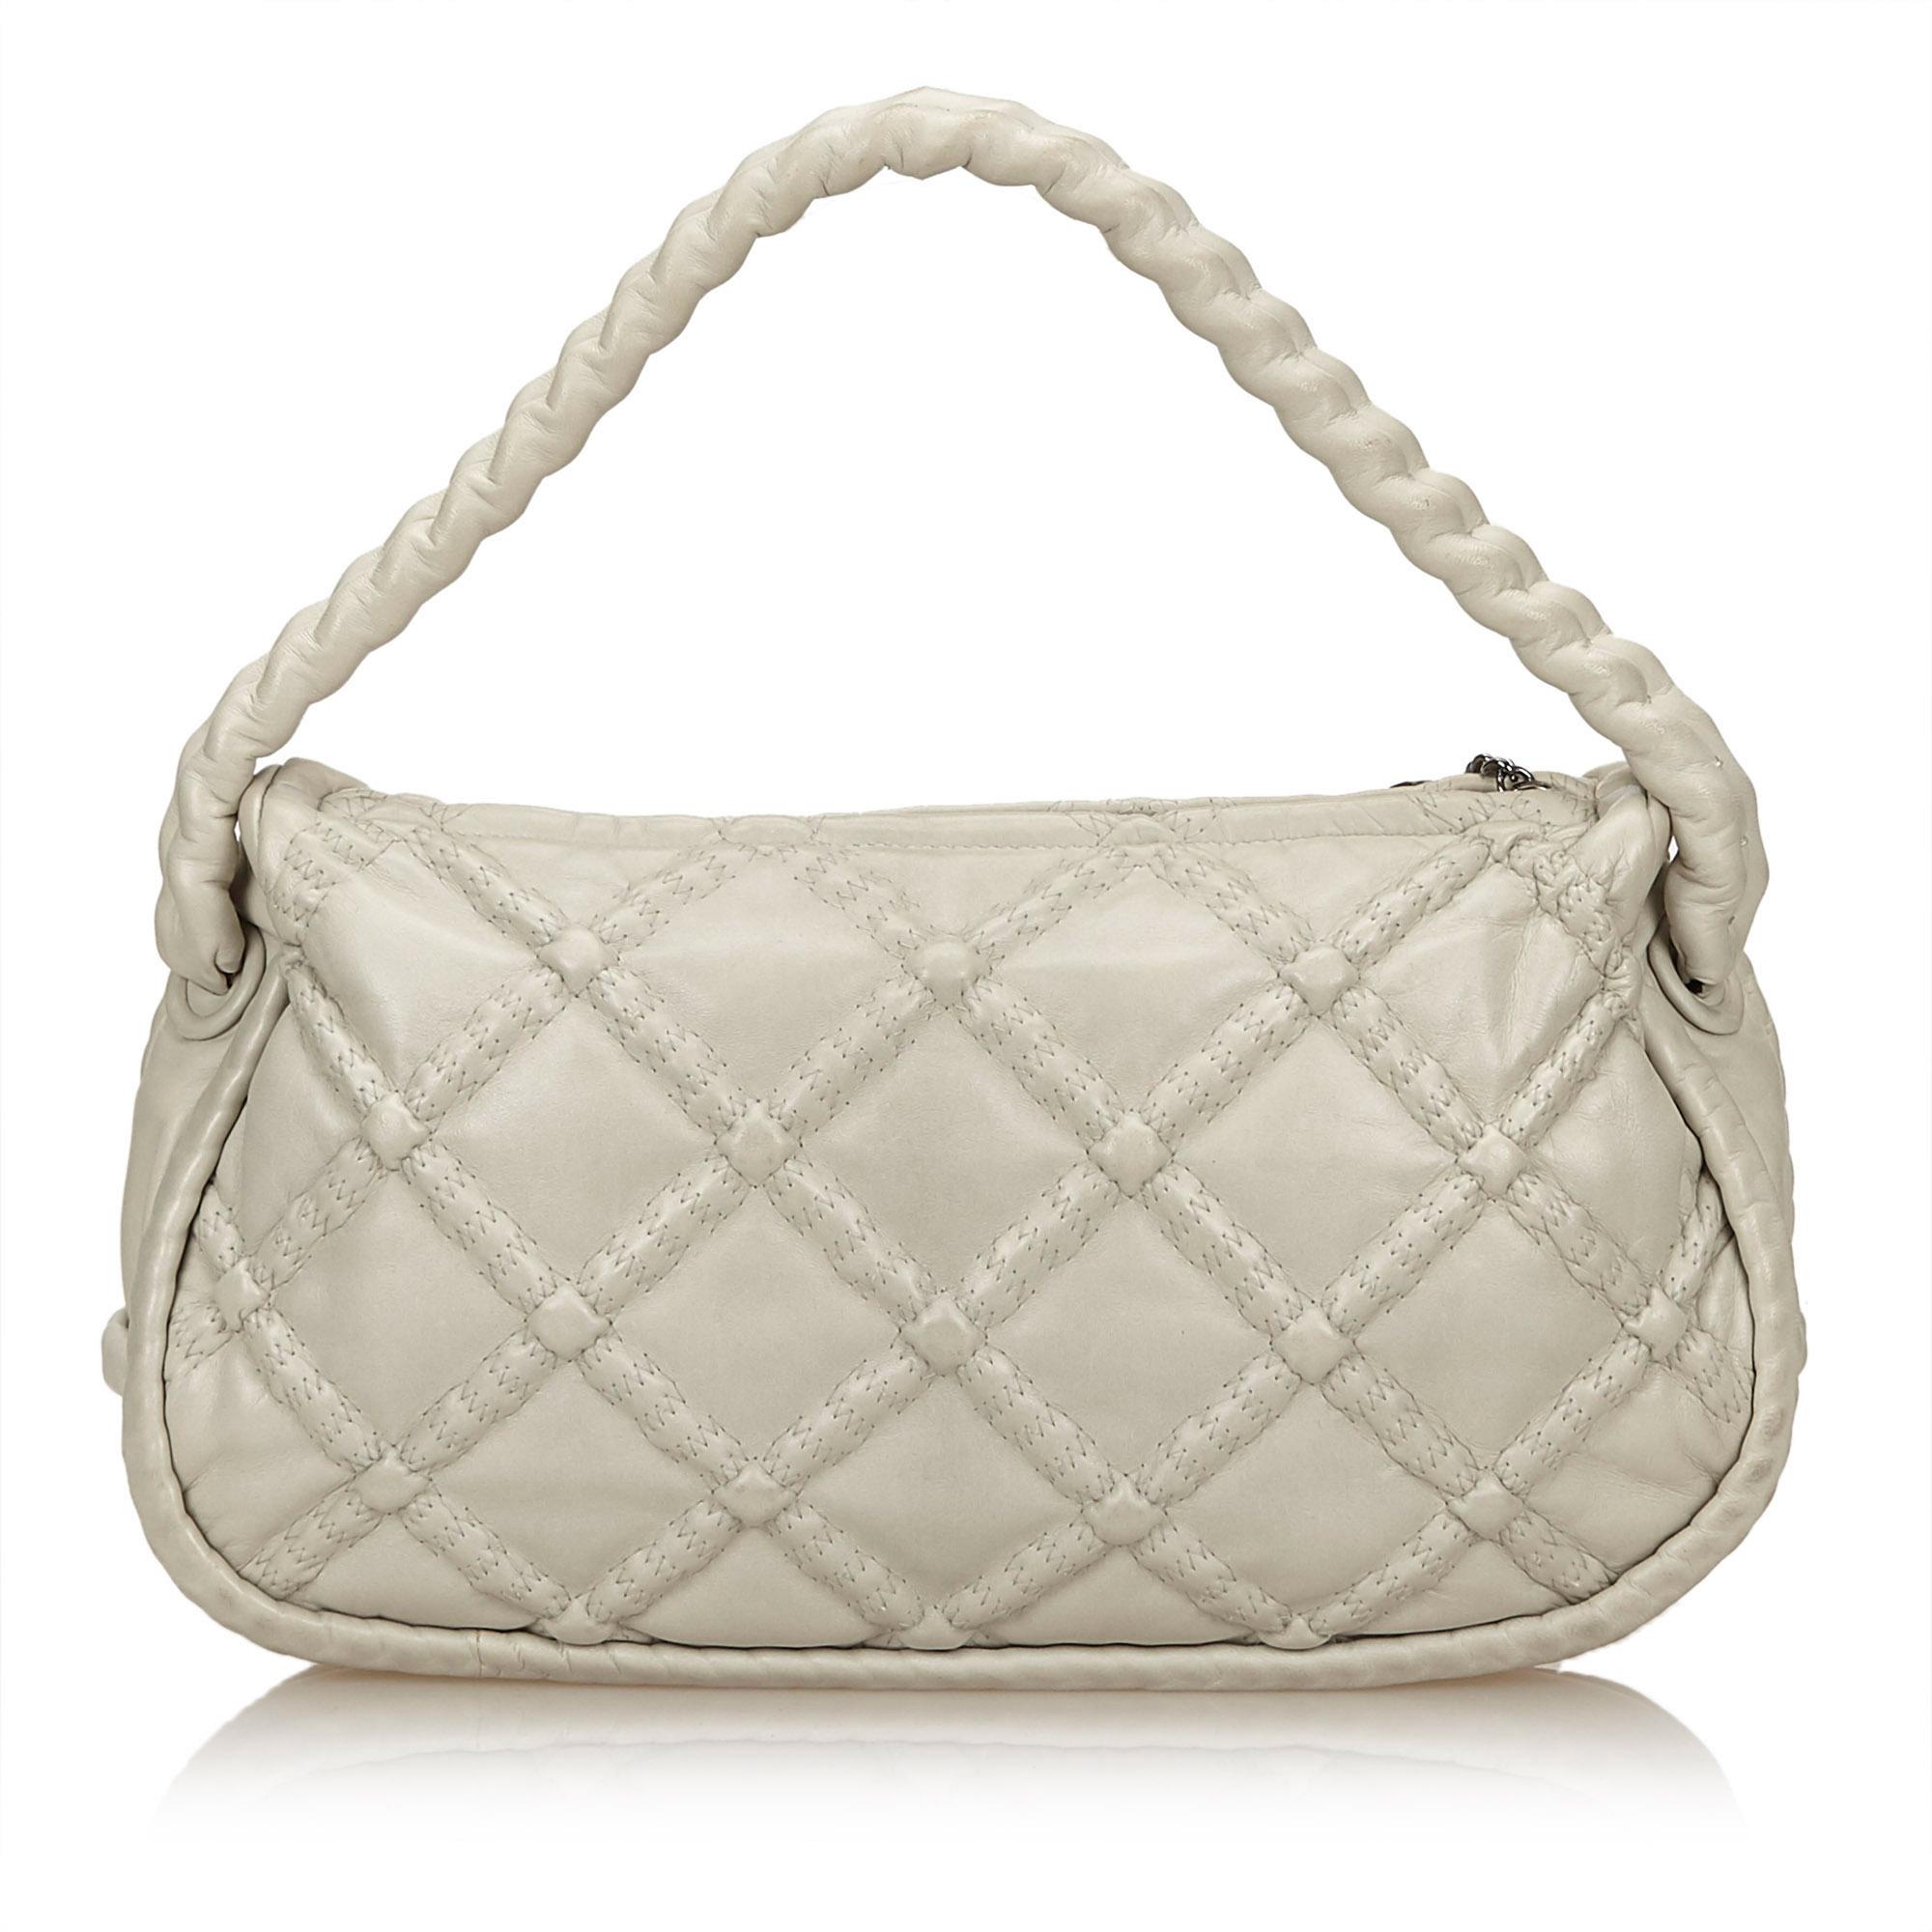 Vintage Authentic Chanel White Quilted Shoulder Bag Italy w Dust Bag MEDIUM  In Good Condition For Sale In Orlando, FL